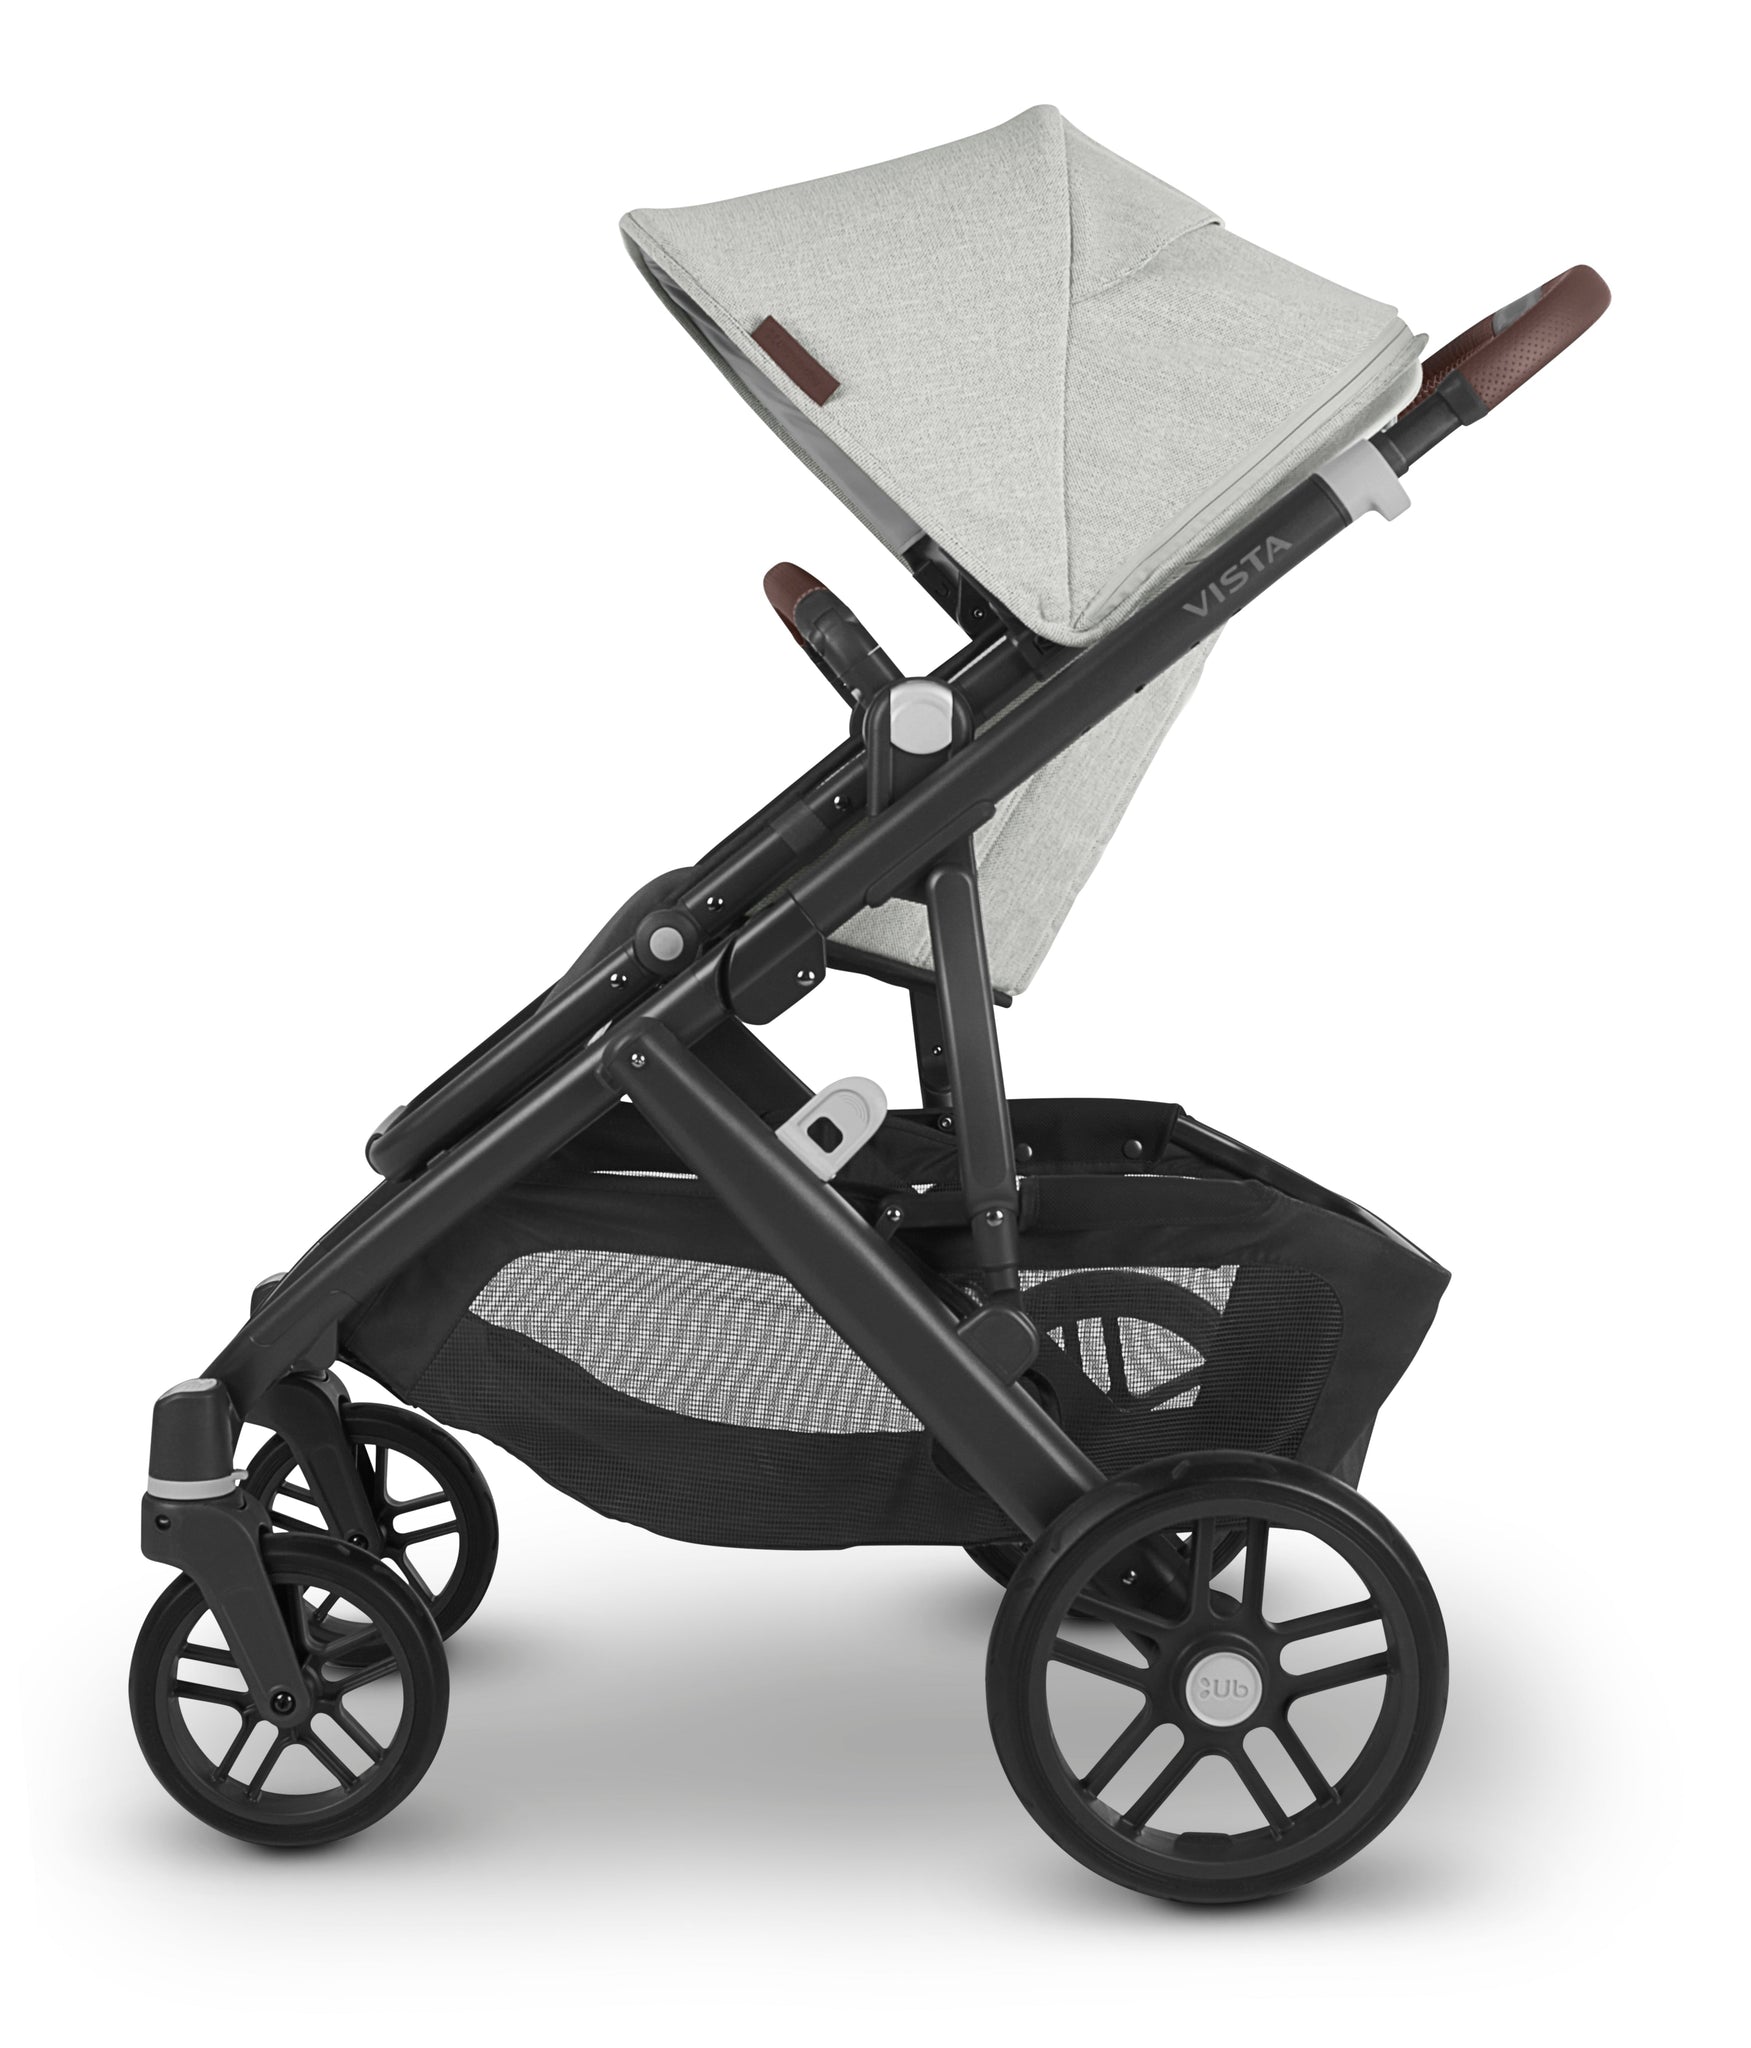 (Open Box - NEW) UPPAbaby Vista V2 Stroller - Anthony (White and Grey Chenille/Carbon/Chestnut Leather)